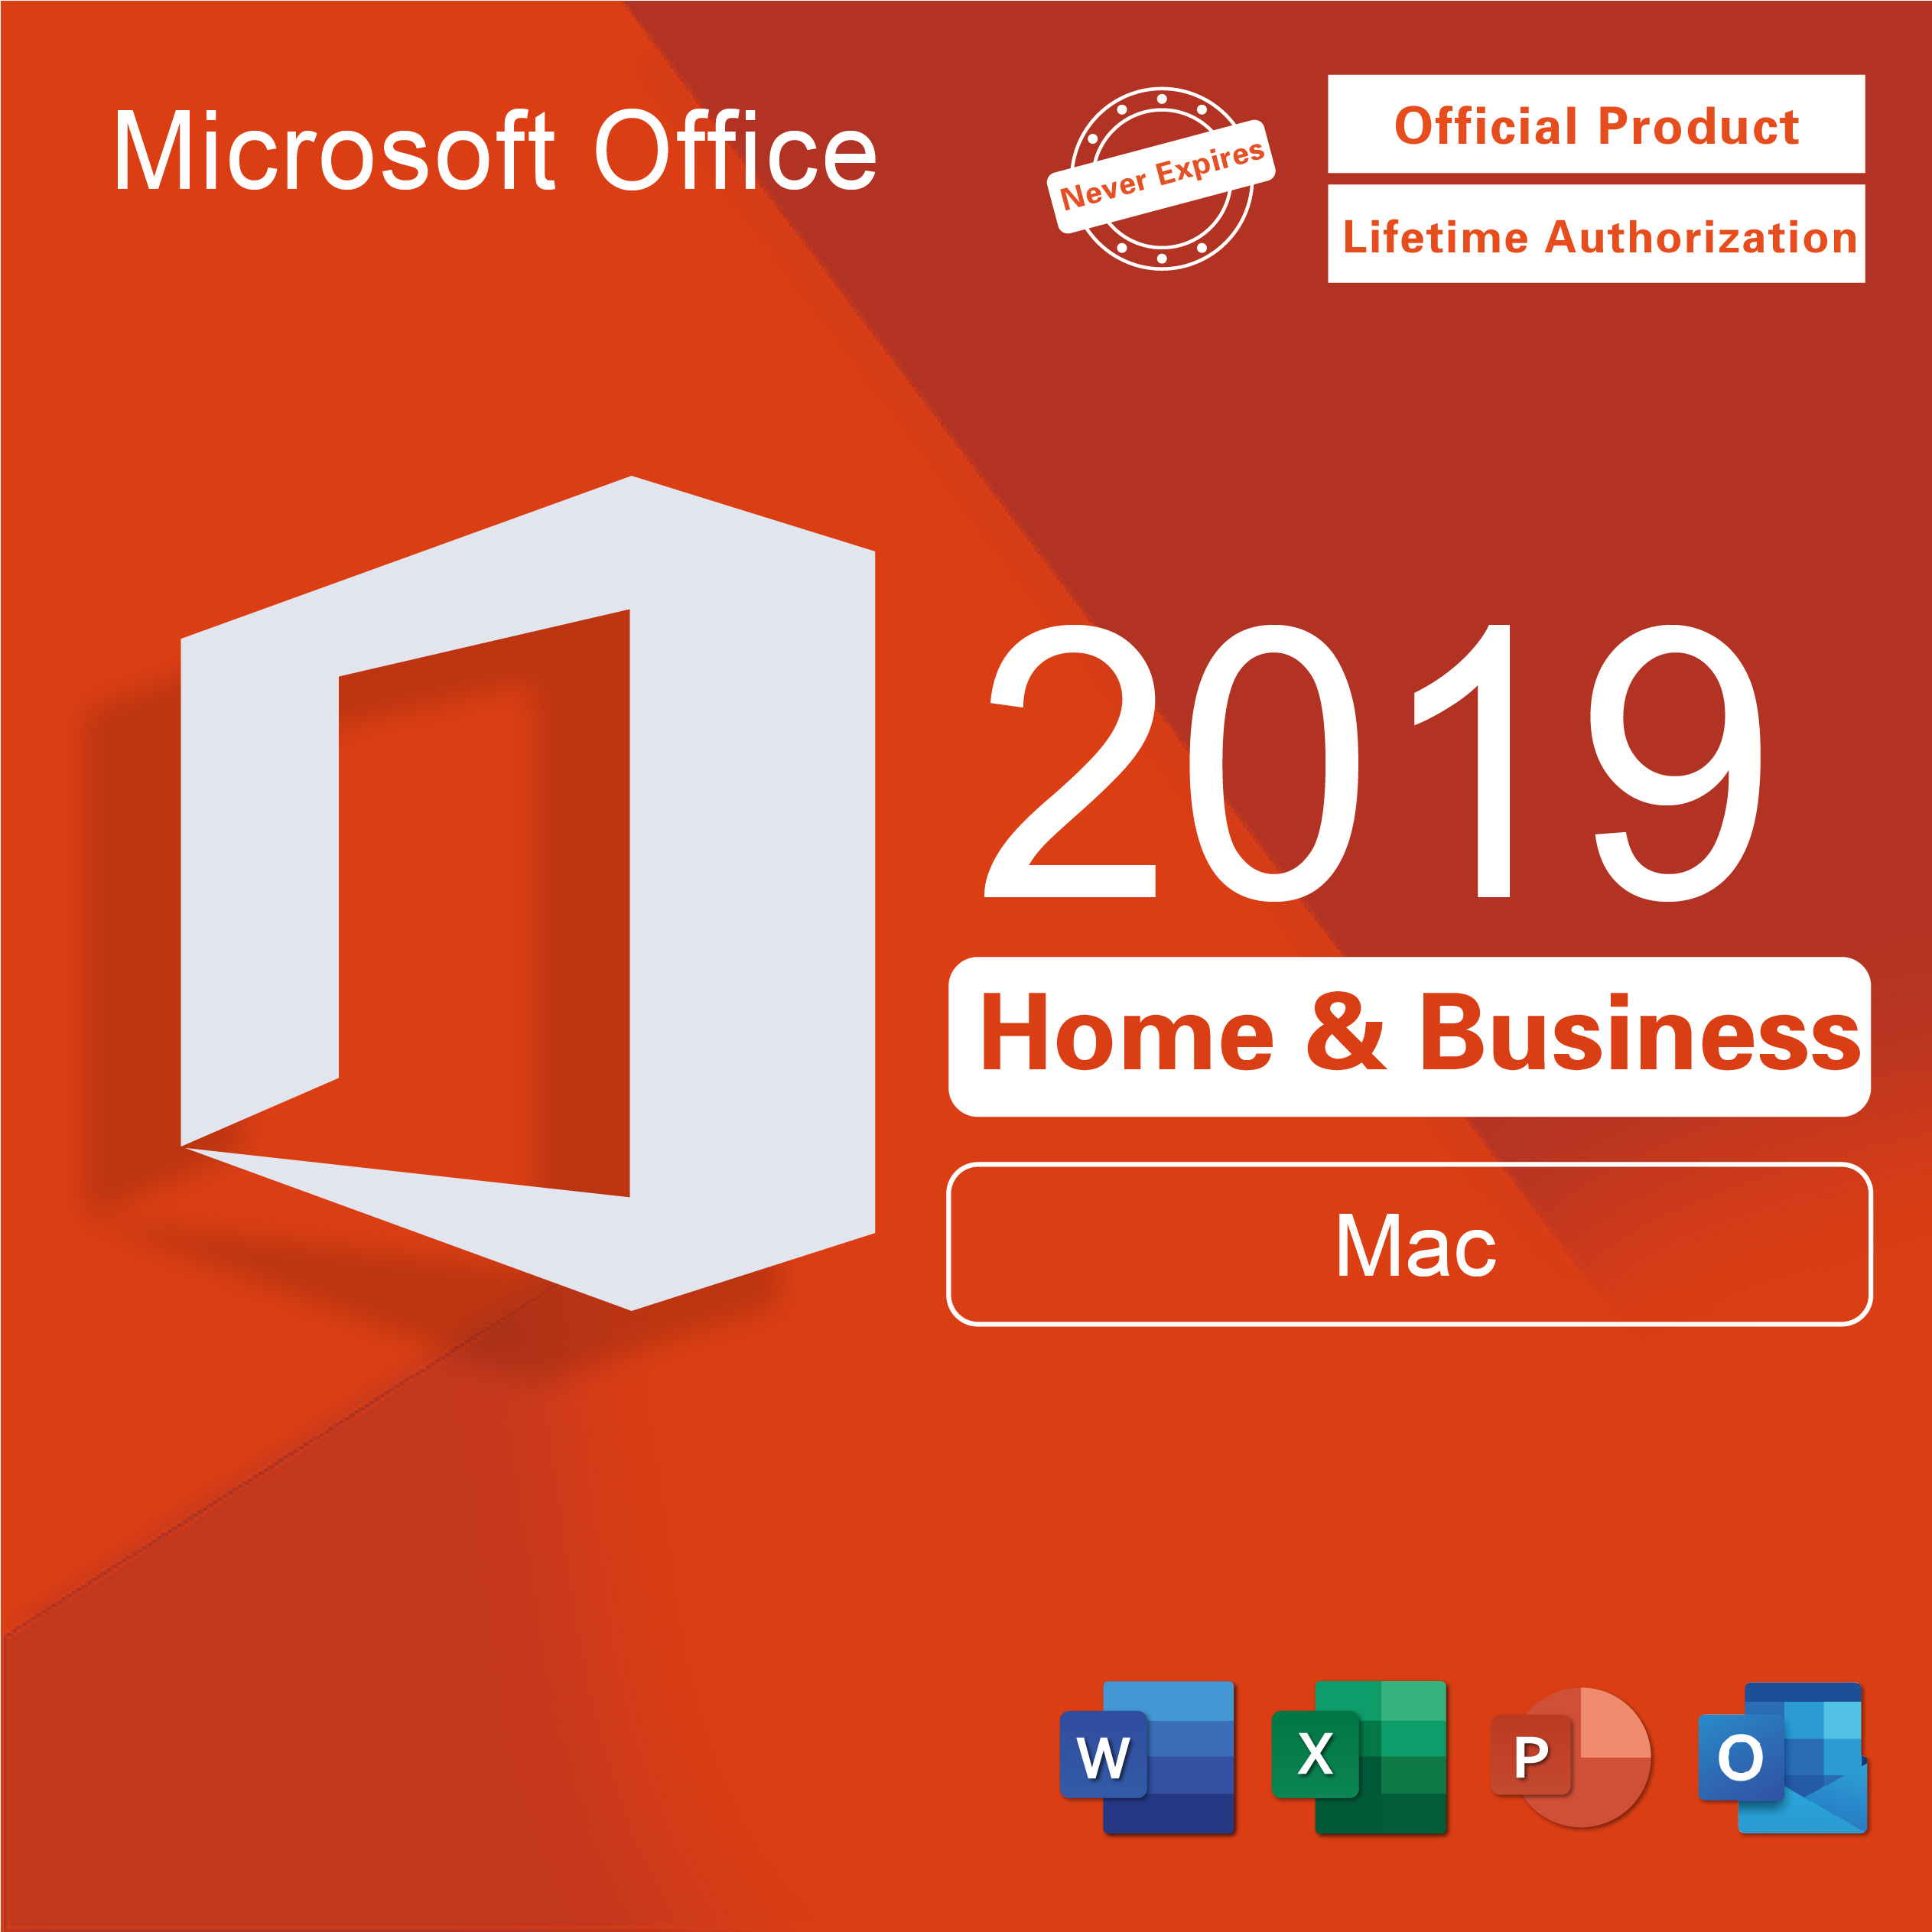 Microsoft Office 2019 Home & Business For Mac